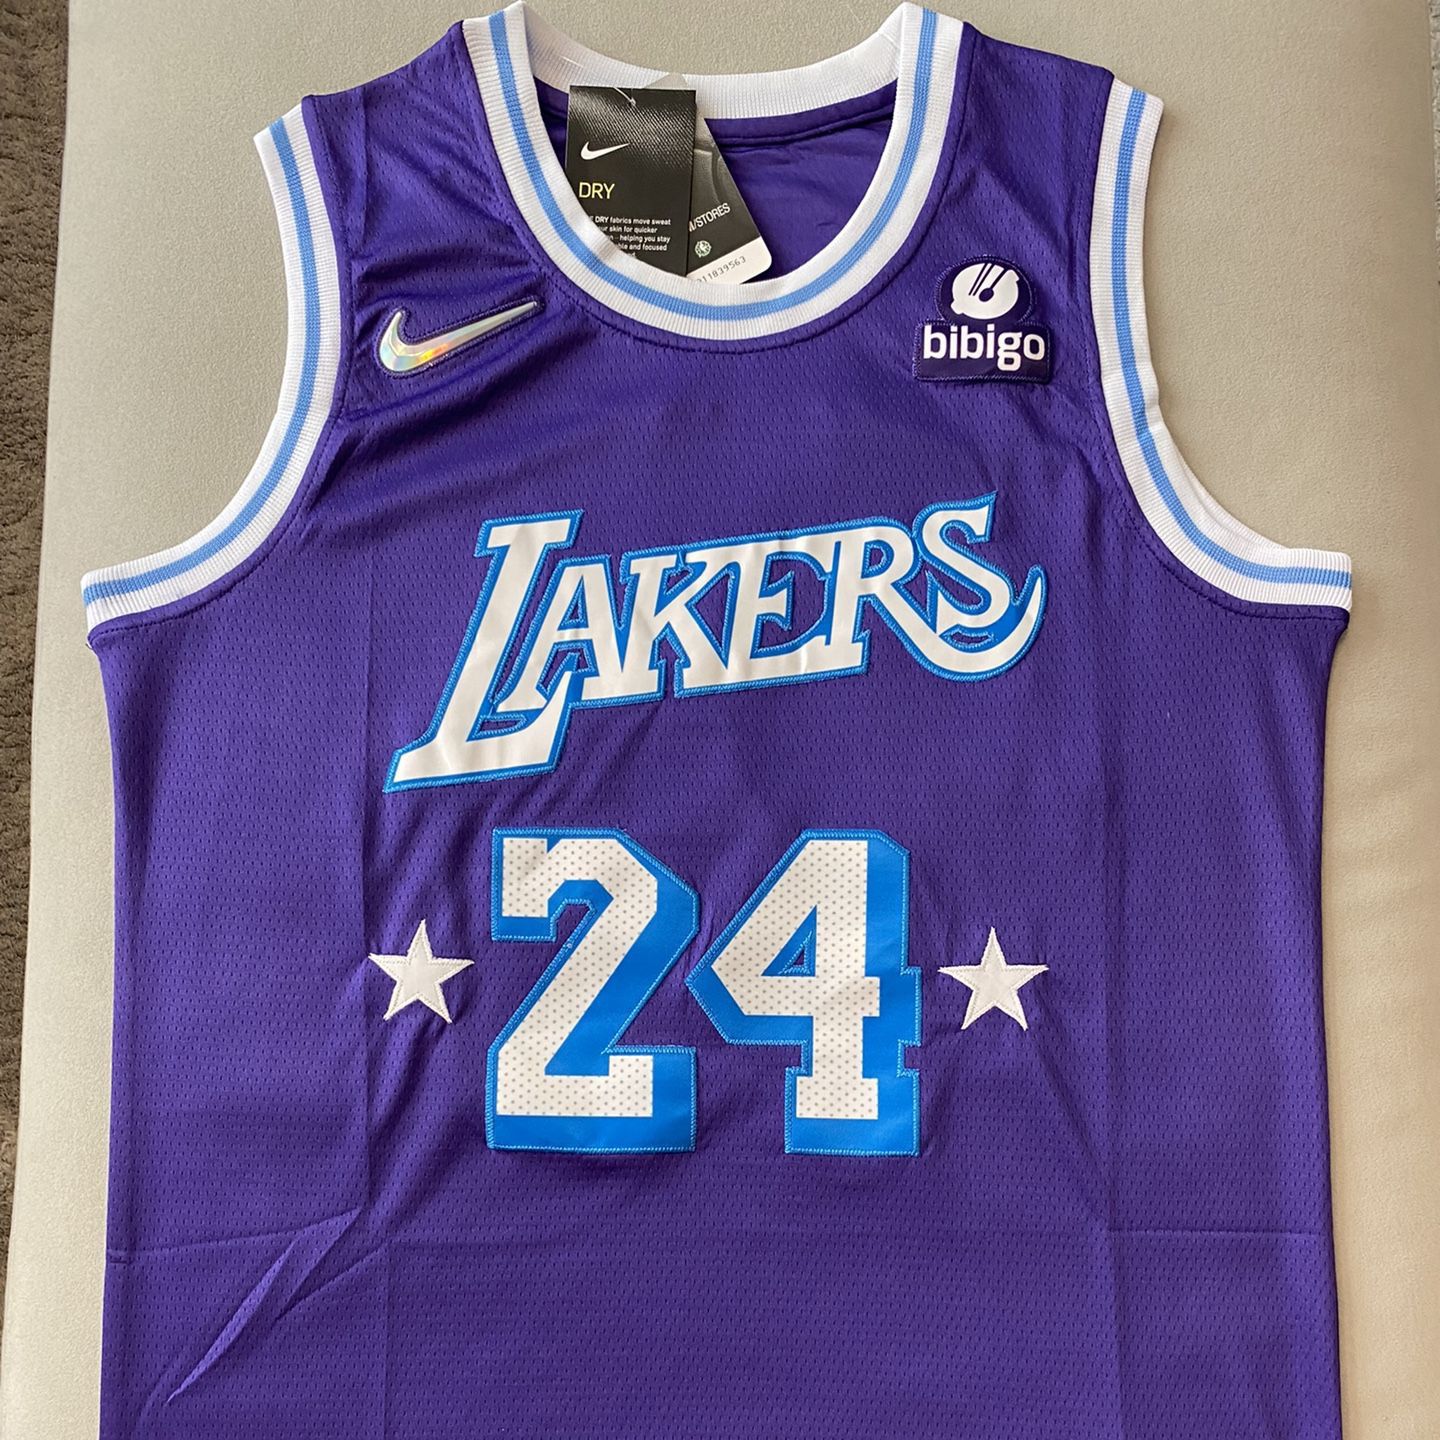 LA Lakers Jersey Kobe Bryant Brand New SIZE XL/52 for Sale in Beverly  Hills, CA - OfferUp